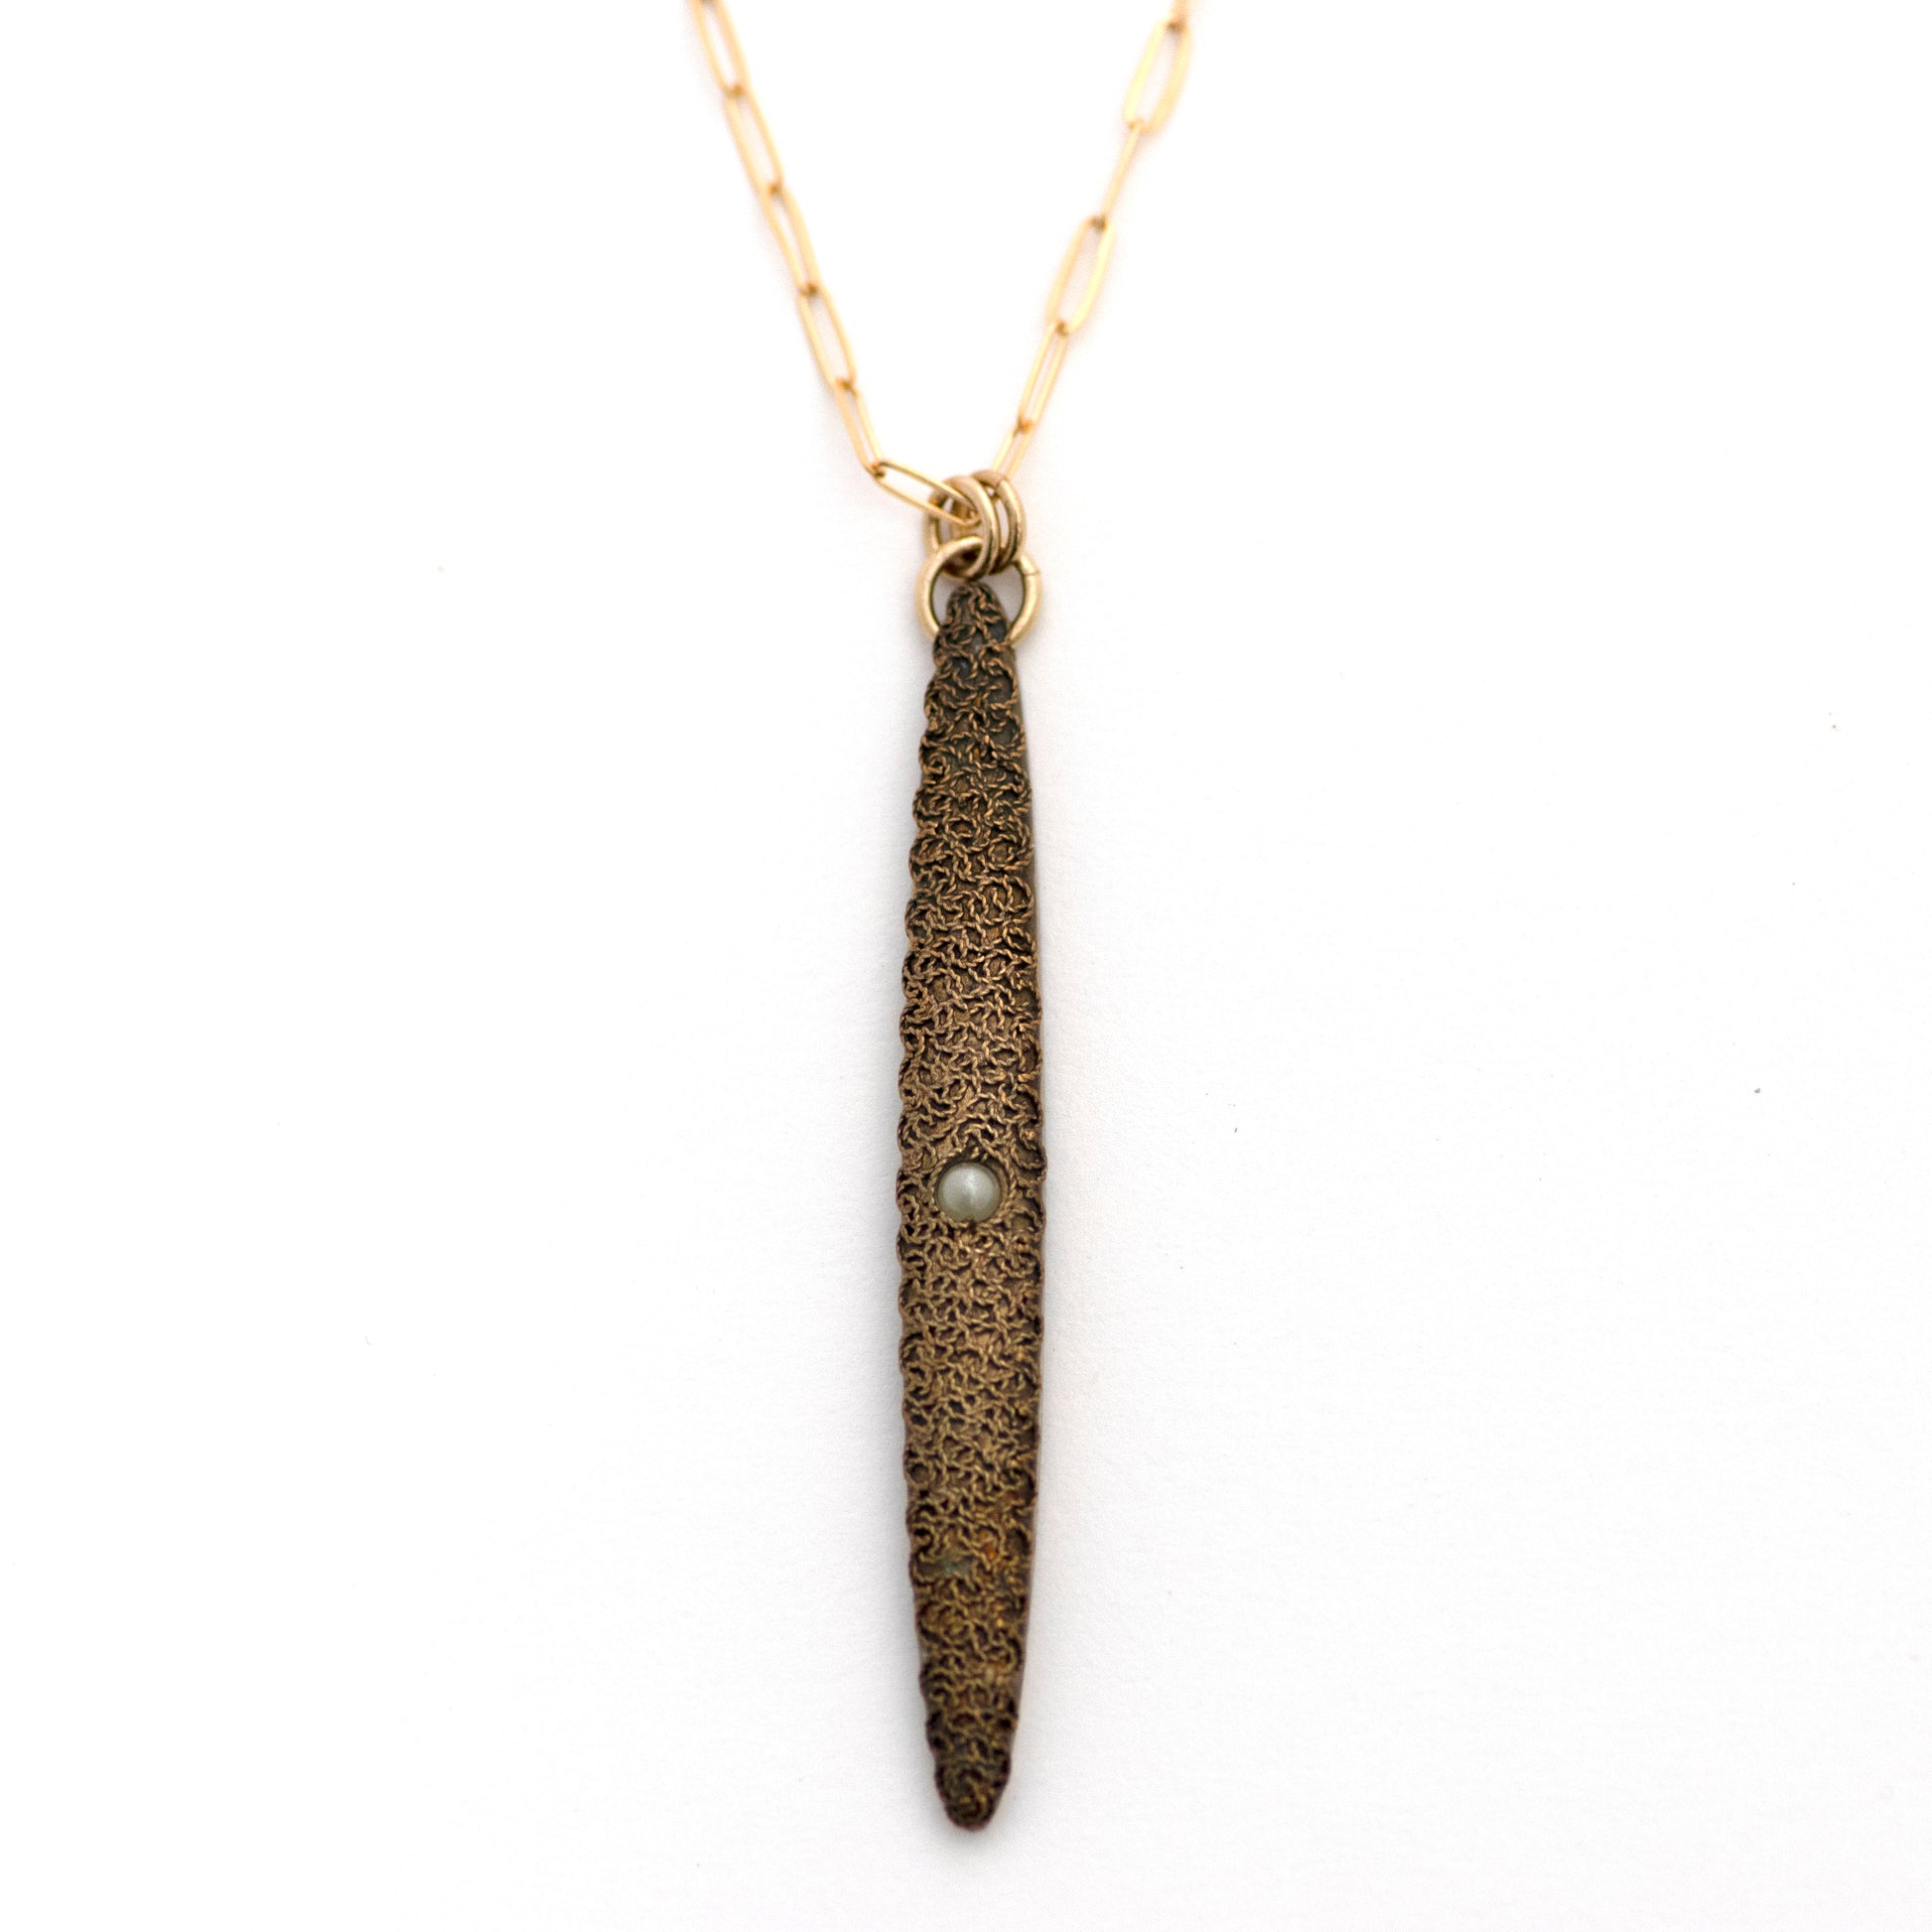 Seed Pearl Filigree Etruscan Revival Vertical Bar Necklace on a 14k yellow gold filled paperclip style chain